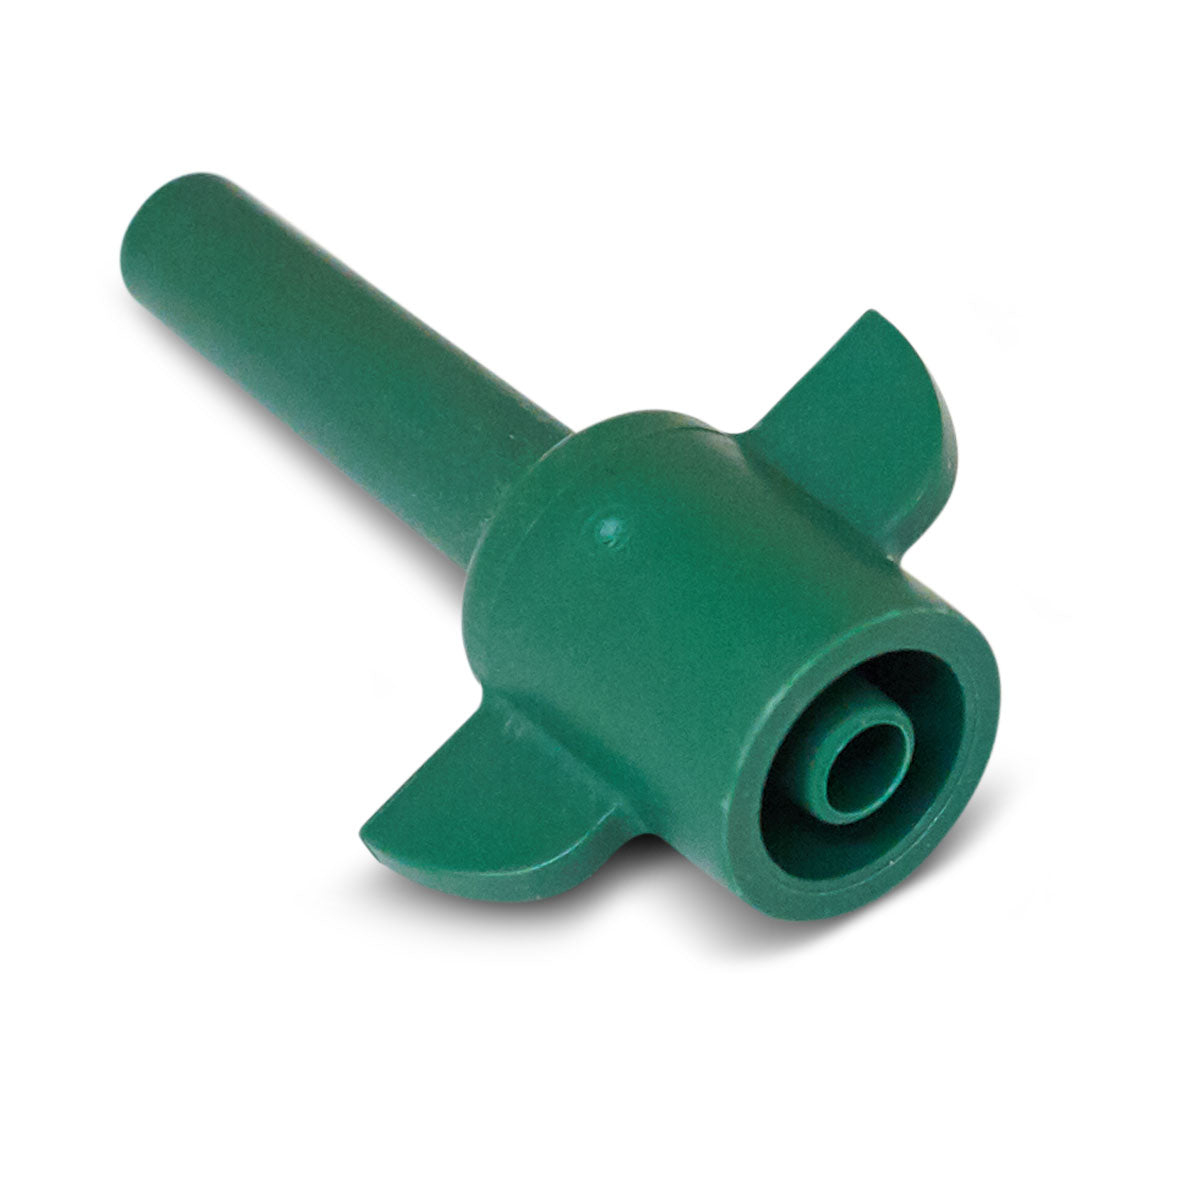 "Zap-Bac" Antibacterial Spout Adapter (green). Reduces a stubby spout from 7/16" to 5/16" (can be used for 2 years)